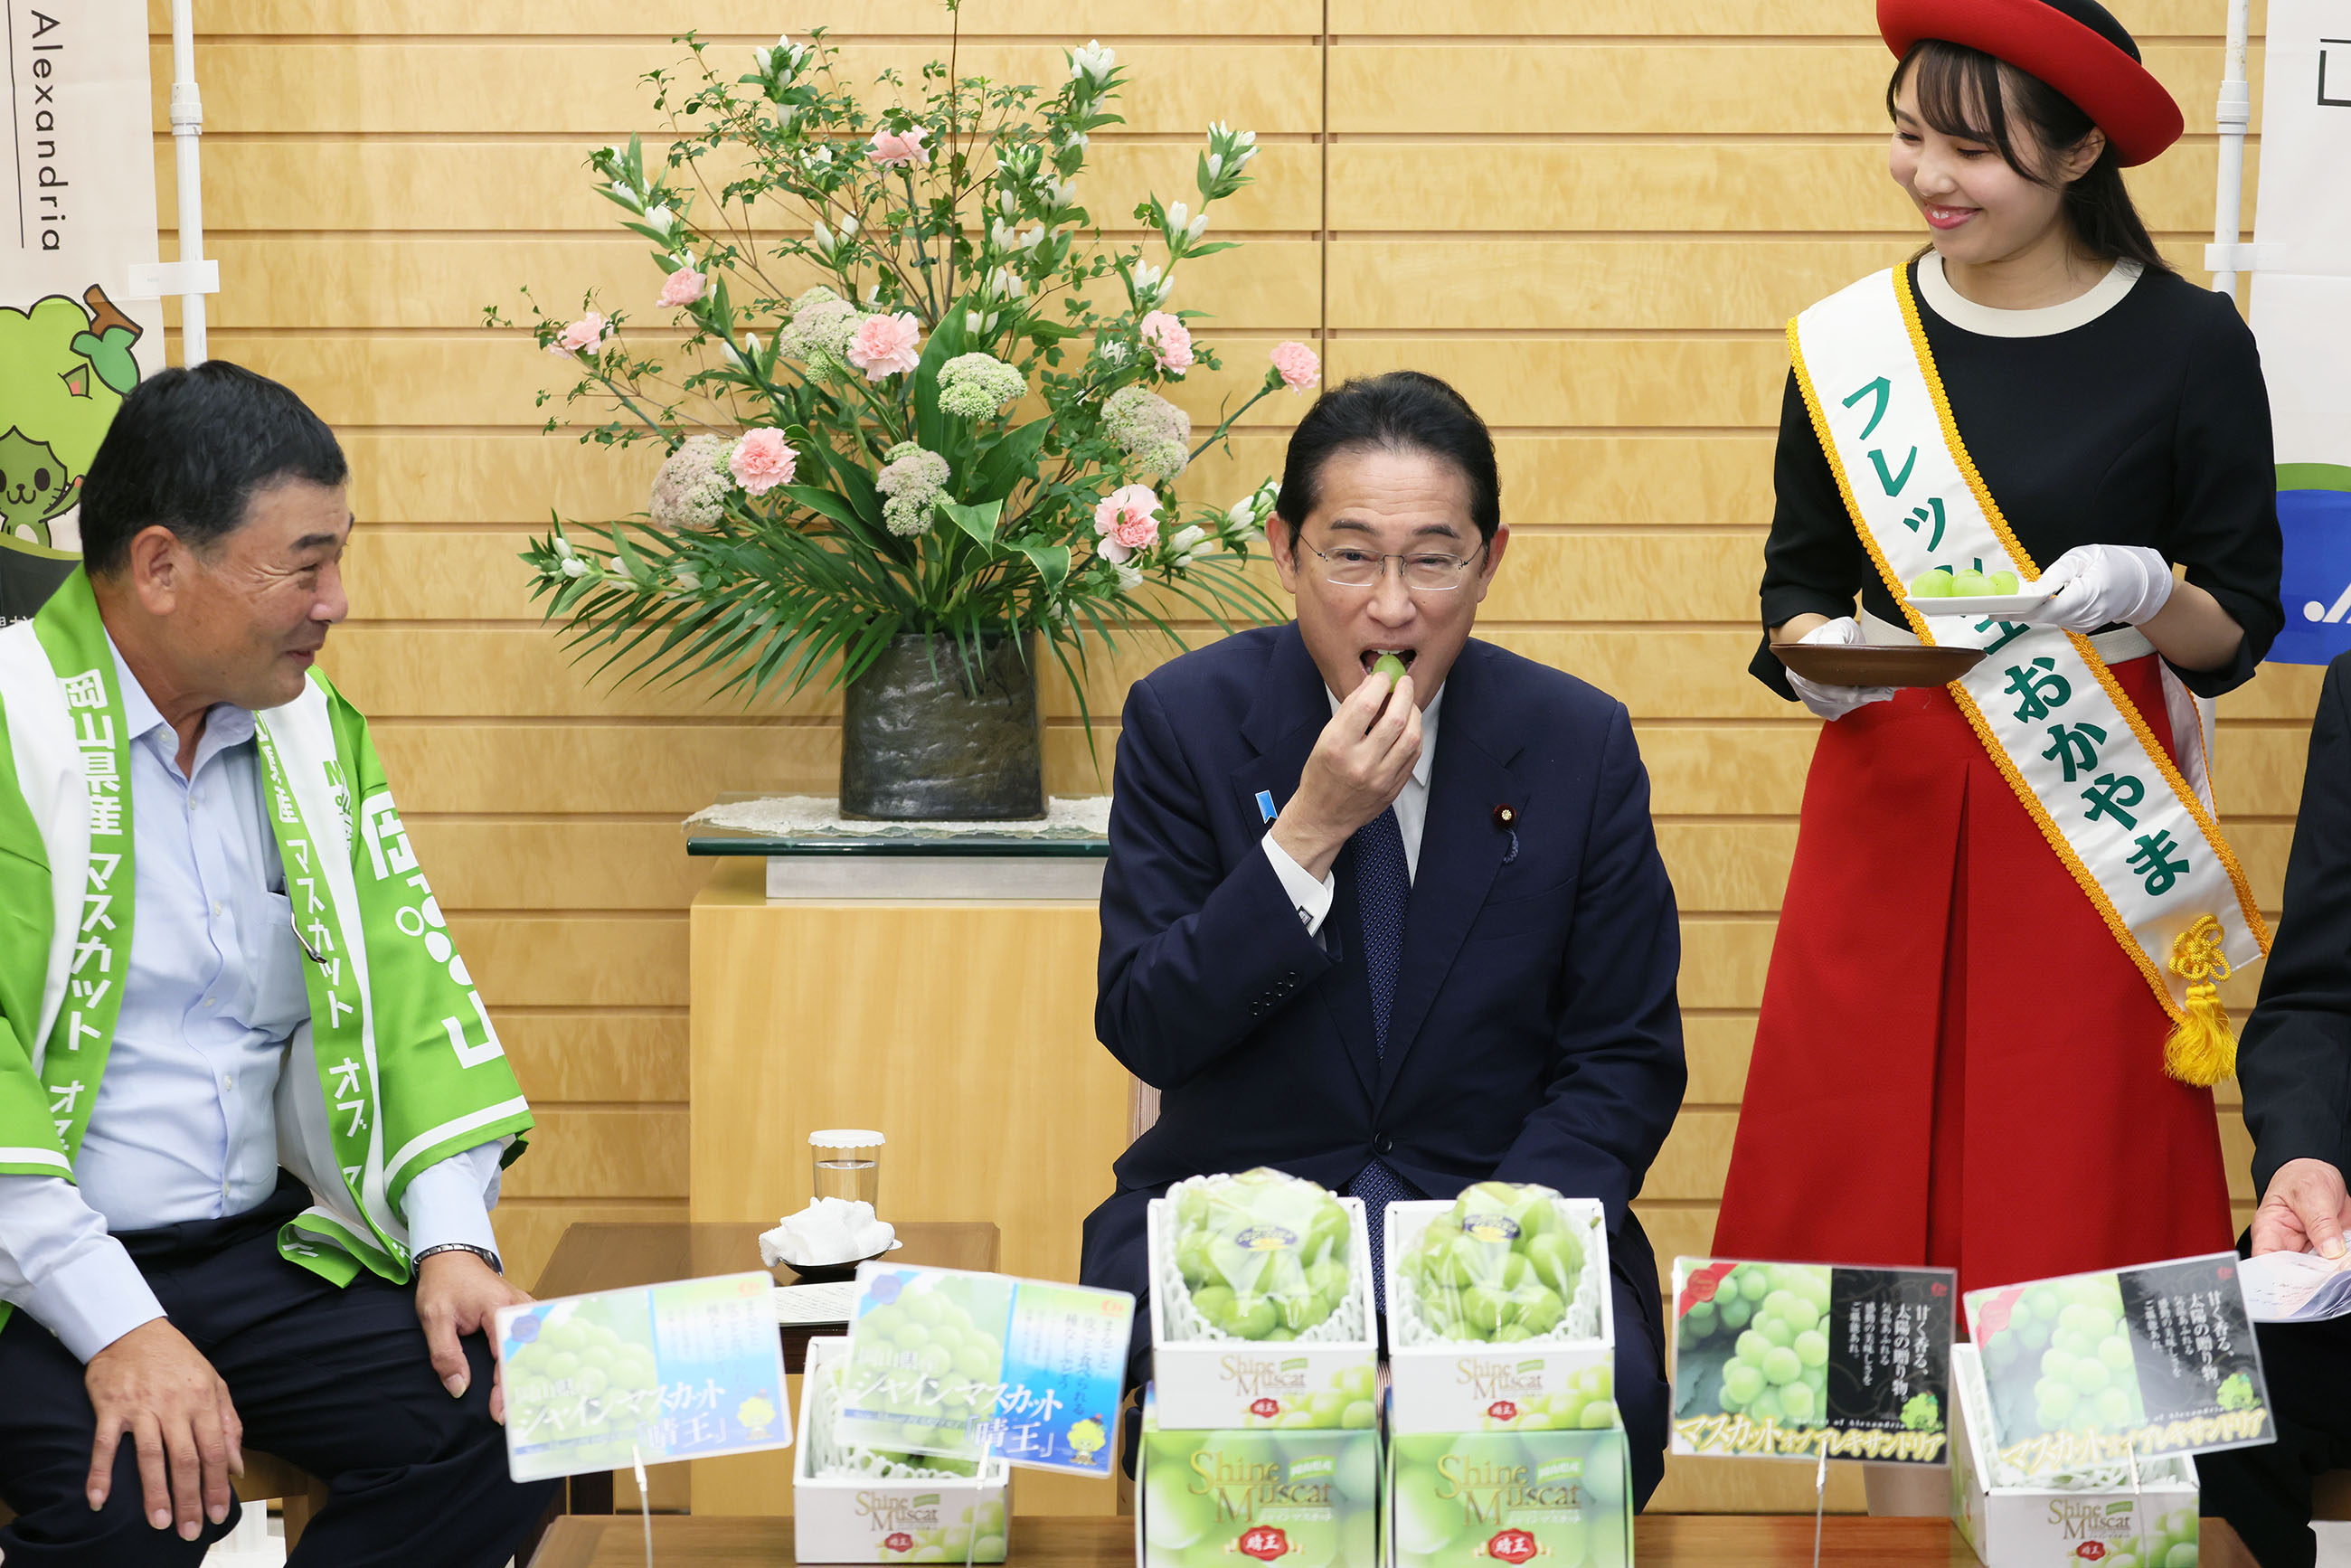 Prime Minister Kishida being presented with Shine Muscat grapes (3)